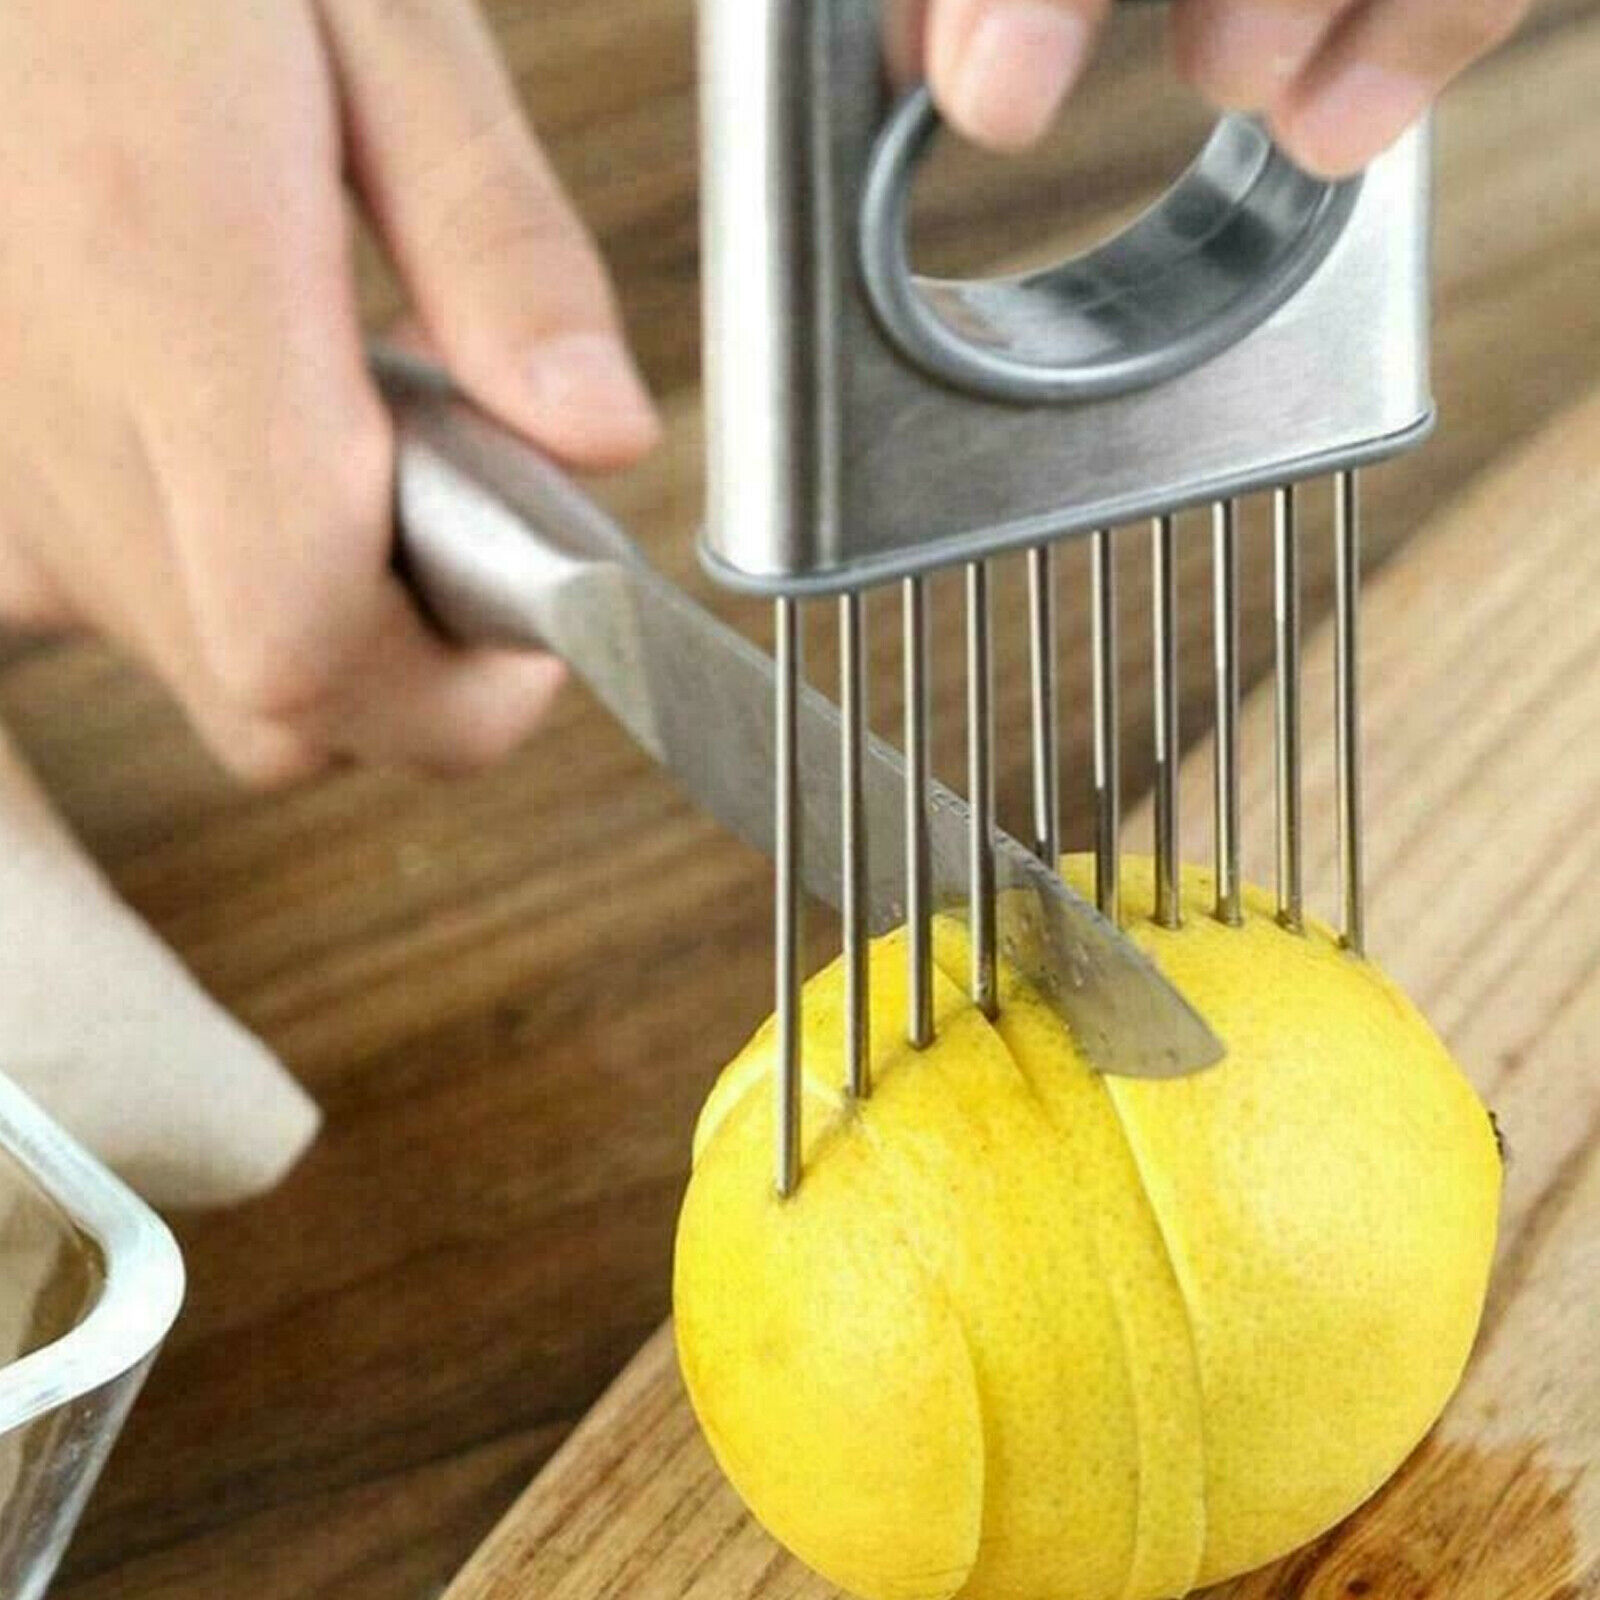 Onion Holder Slicer Vegetable Tools Tomato Cutter Aid Kitchen Gadgets Peel Guide